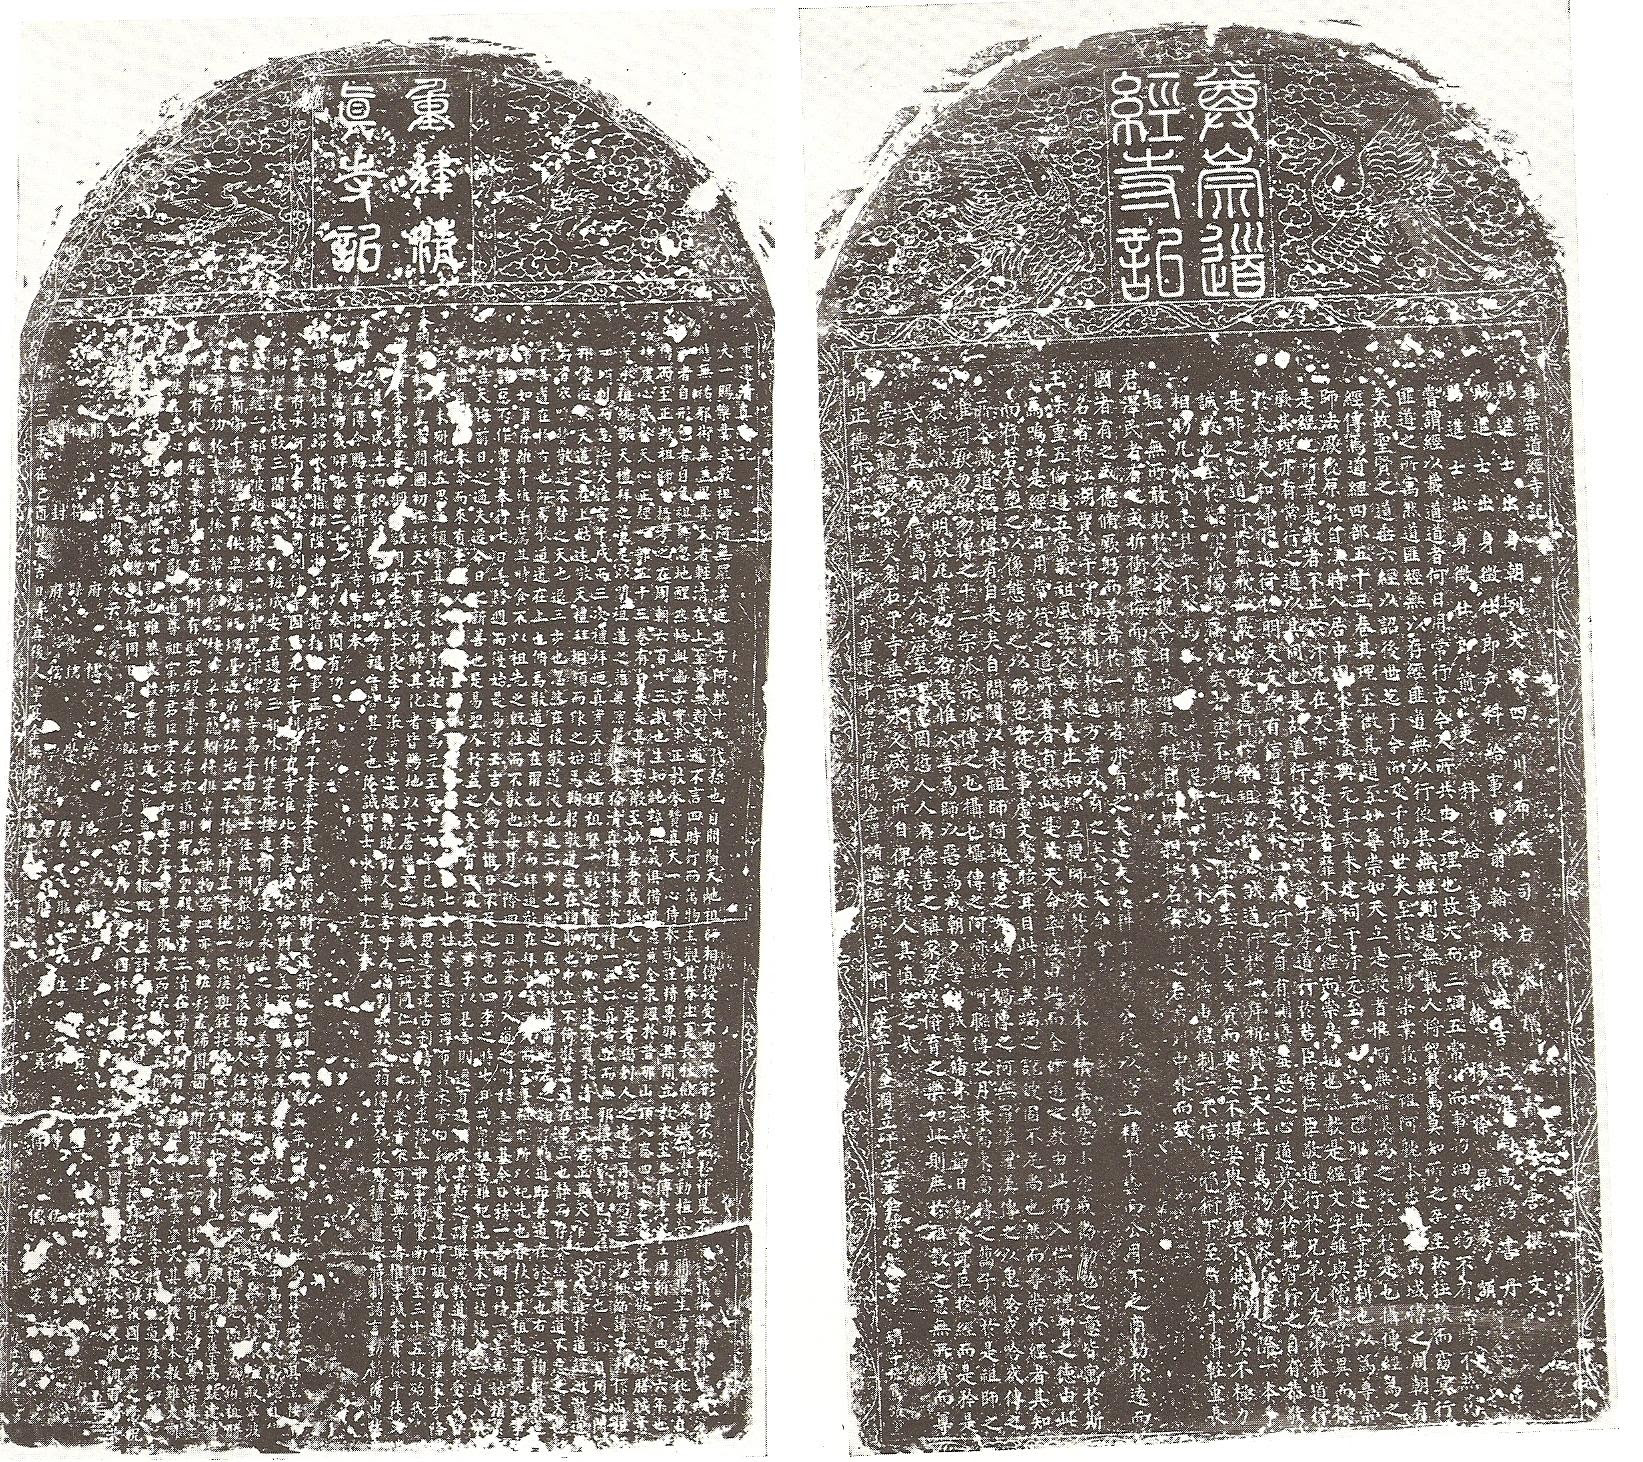 http://upload.wikimedia.org/wikipedia/commons/c/ce/Composite_kaifeng_stone_inscriptions-1-.JPG